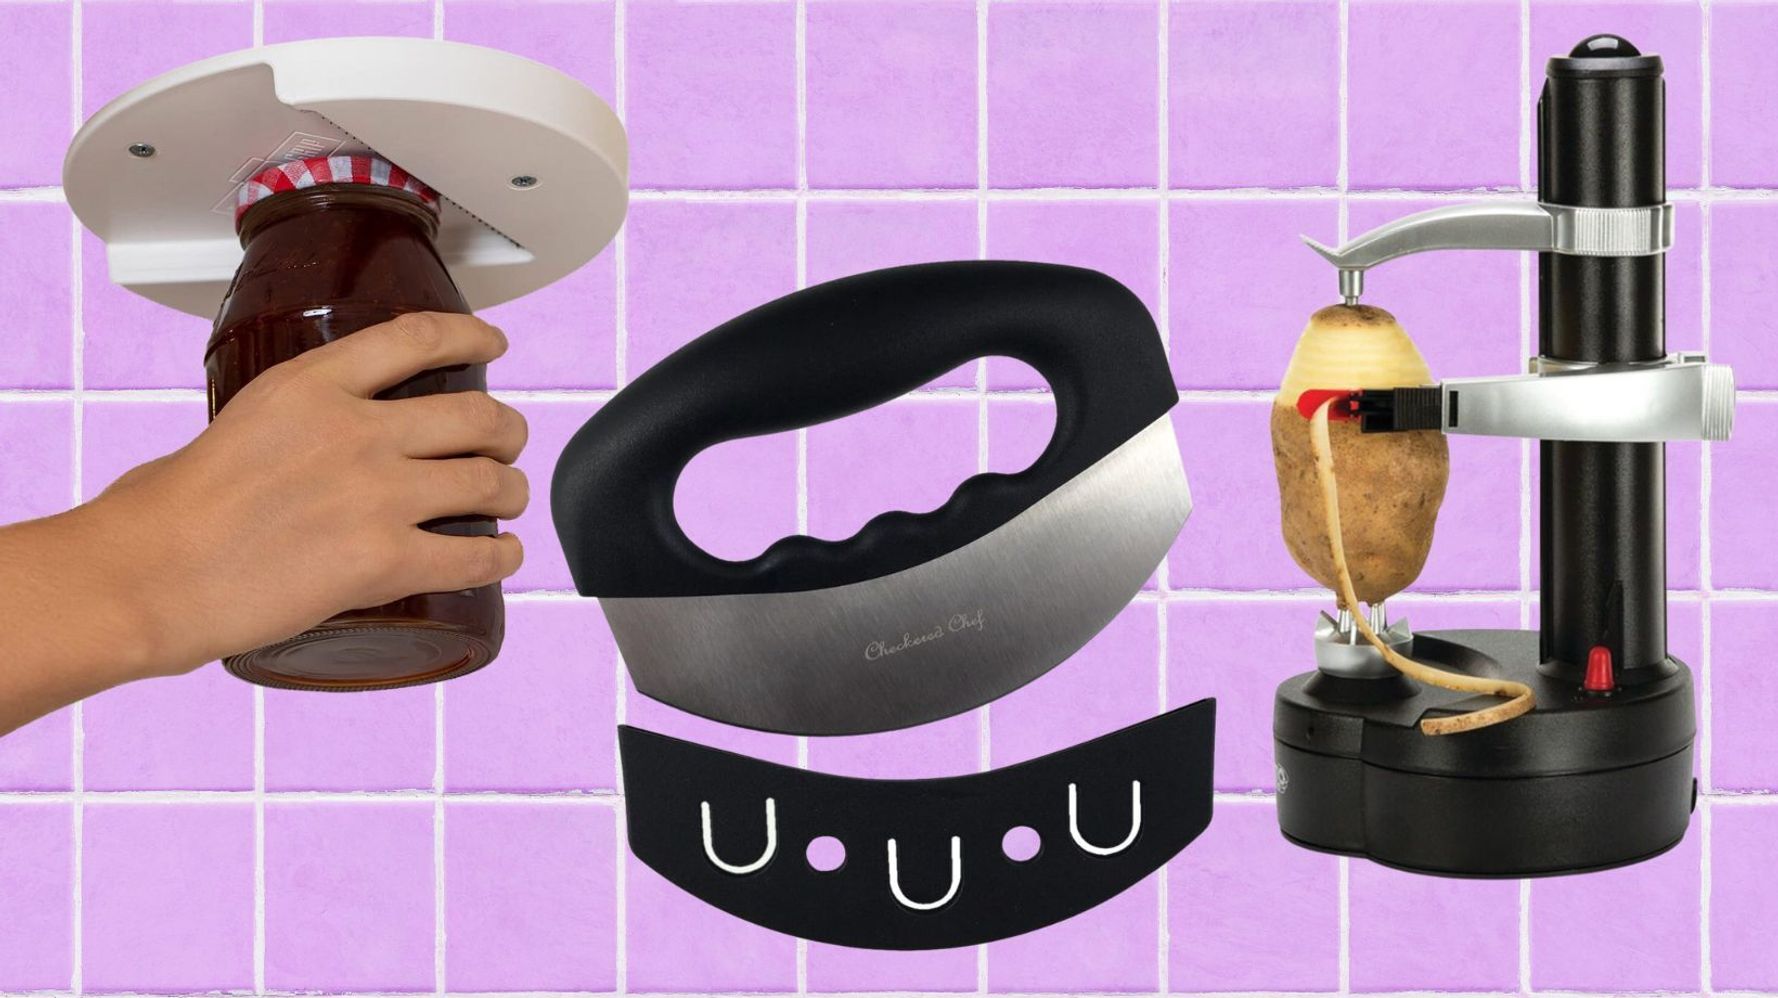 12 Helpful Kitchen Gadgets For People With Limited Dexterity